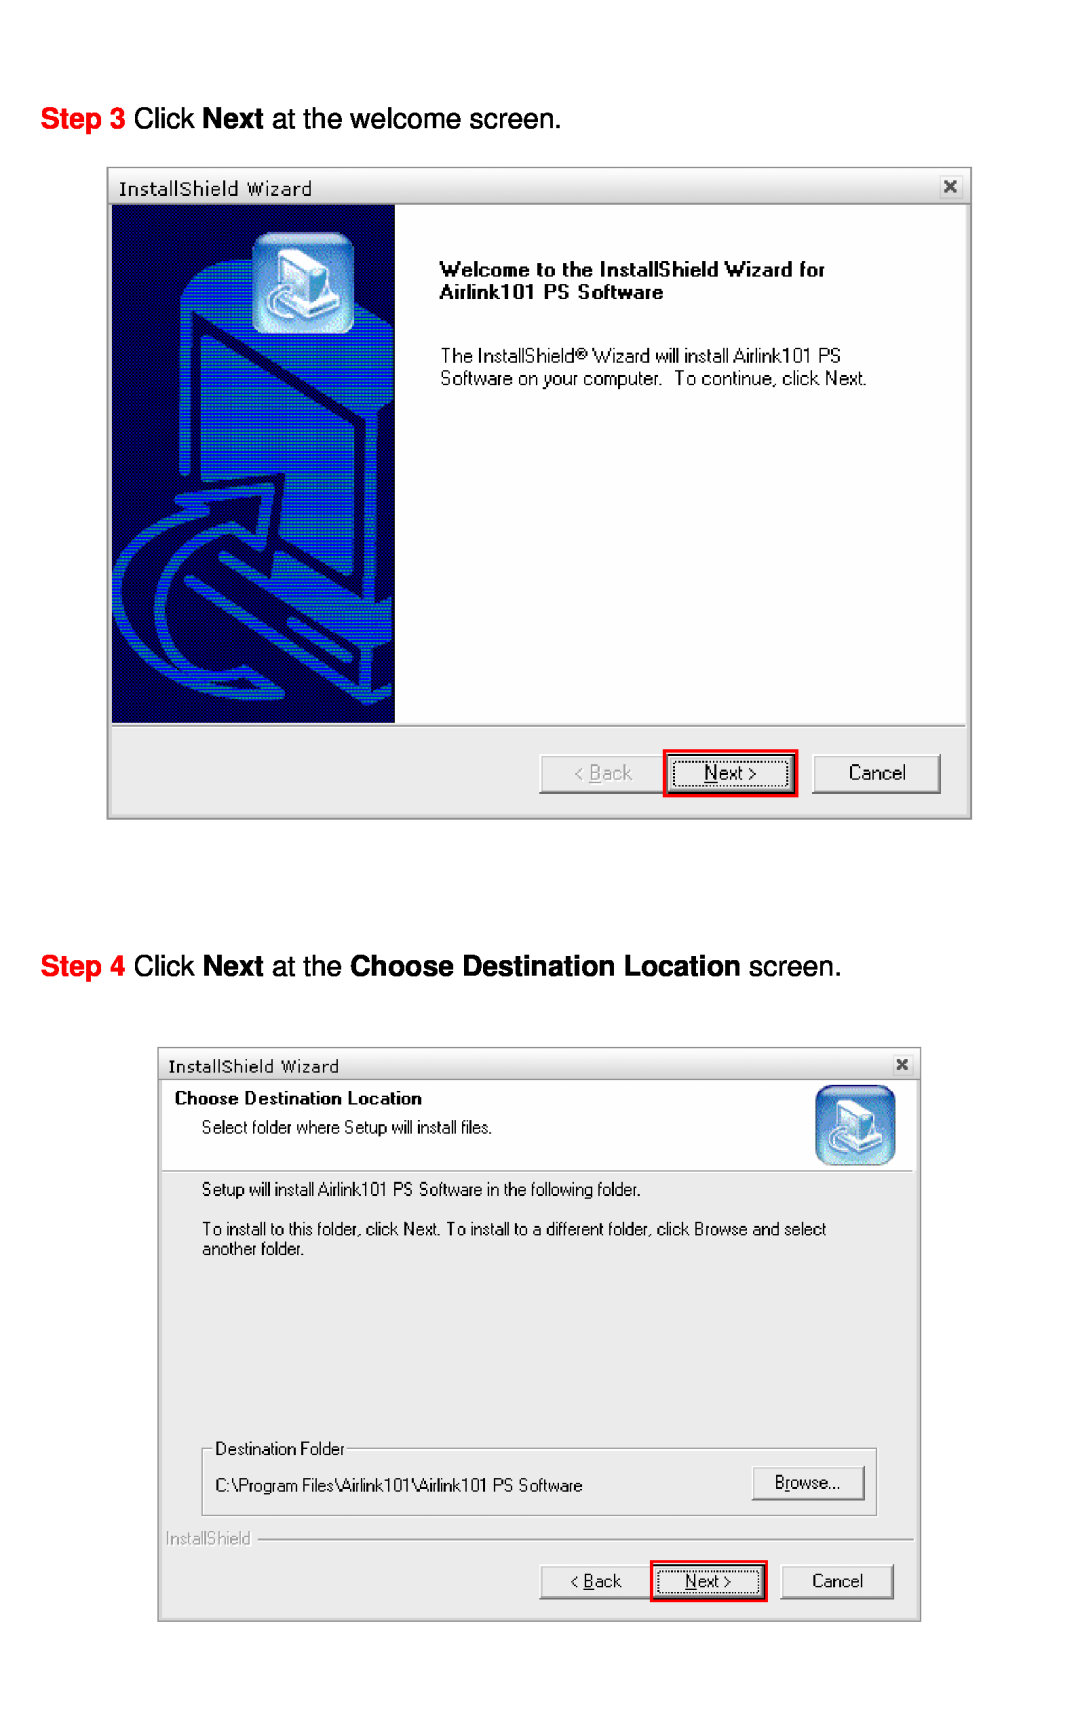 Airlink101 AMPS240W user manual Click Next at the welcome screen, Click Next at the Choose Destination Location screen 